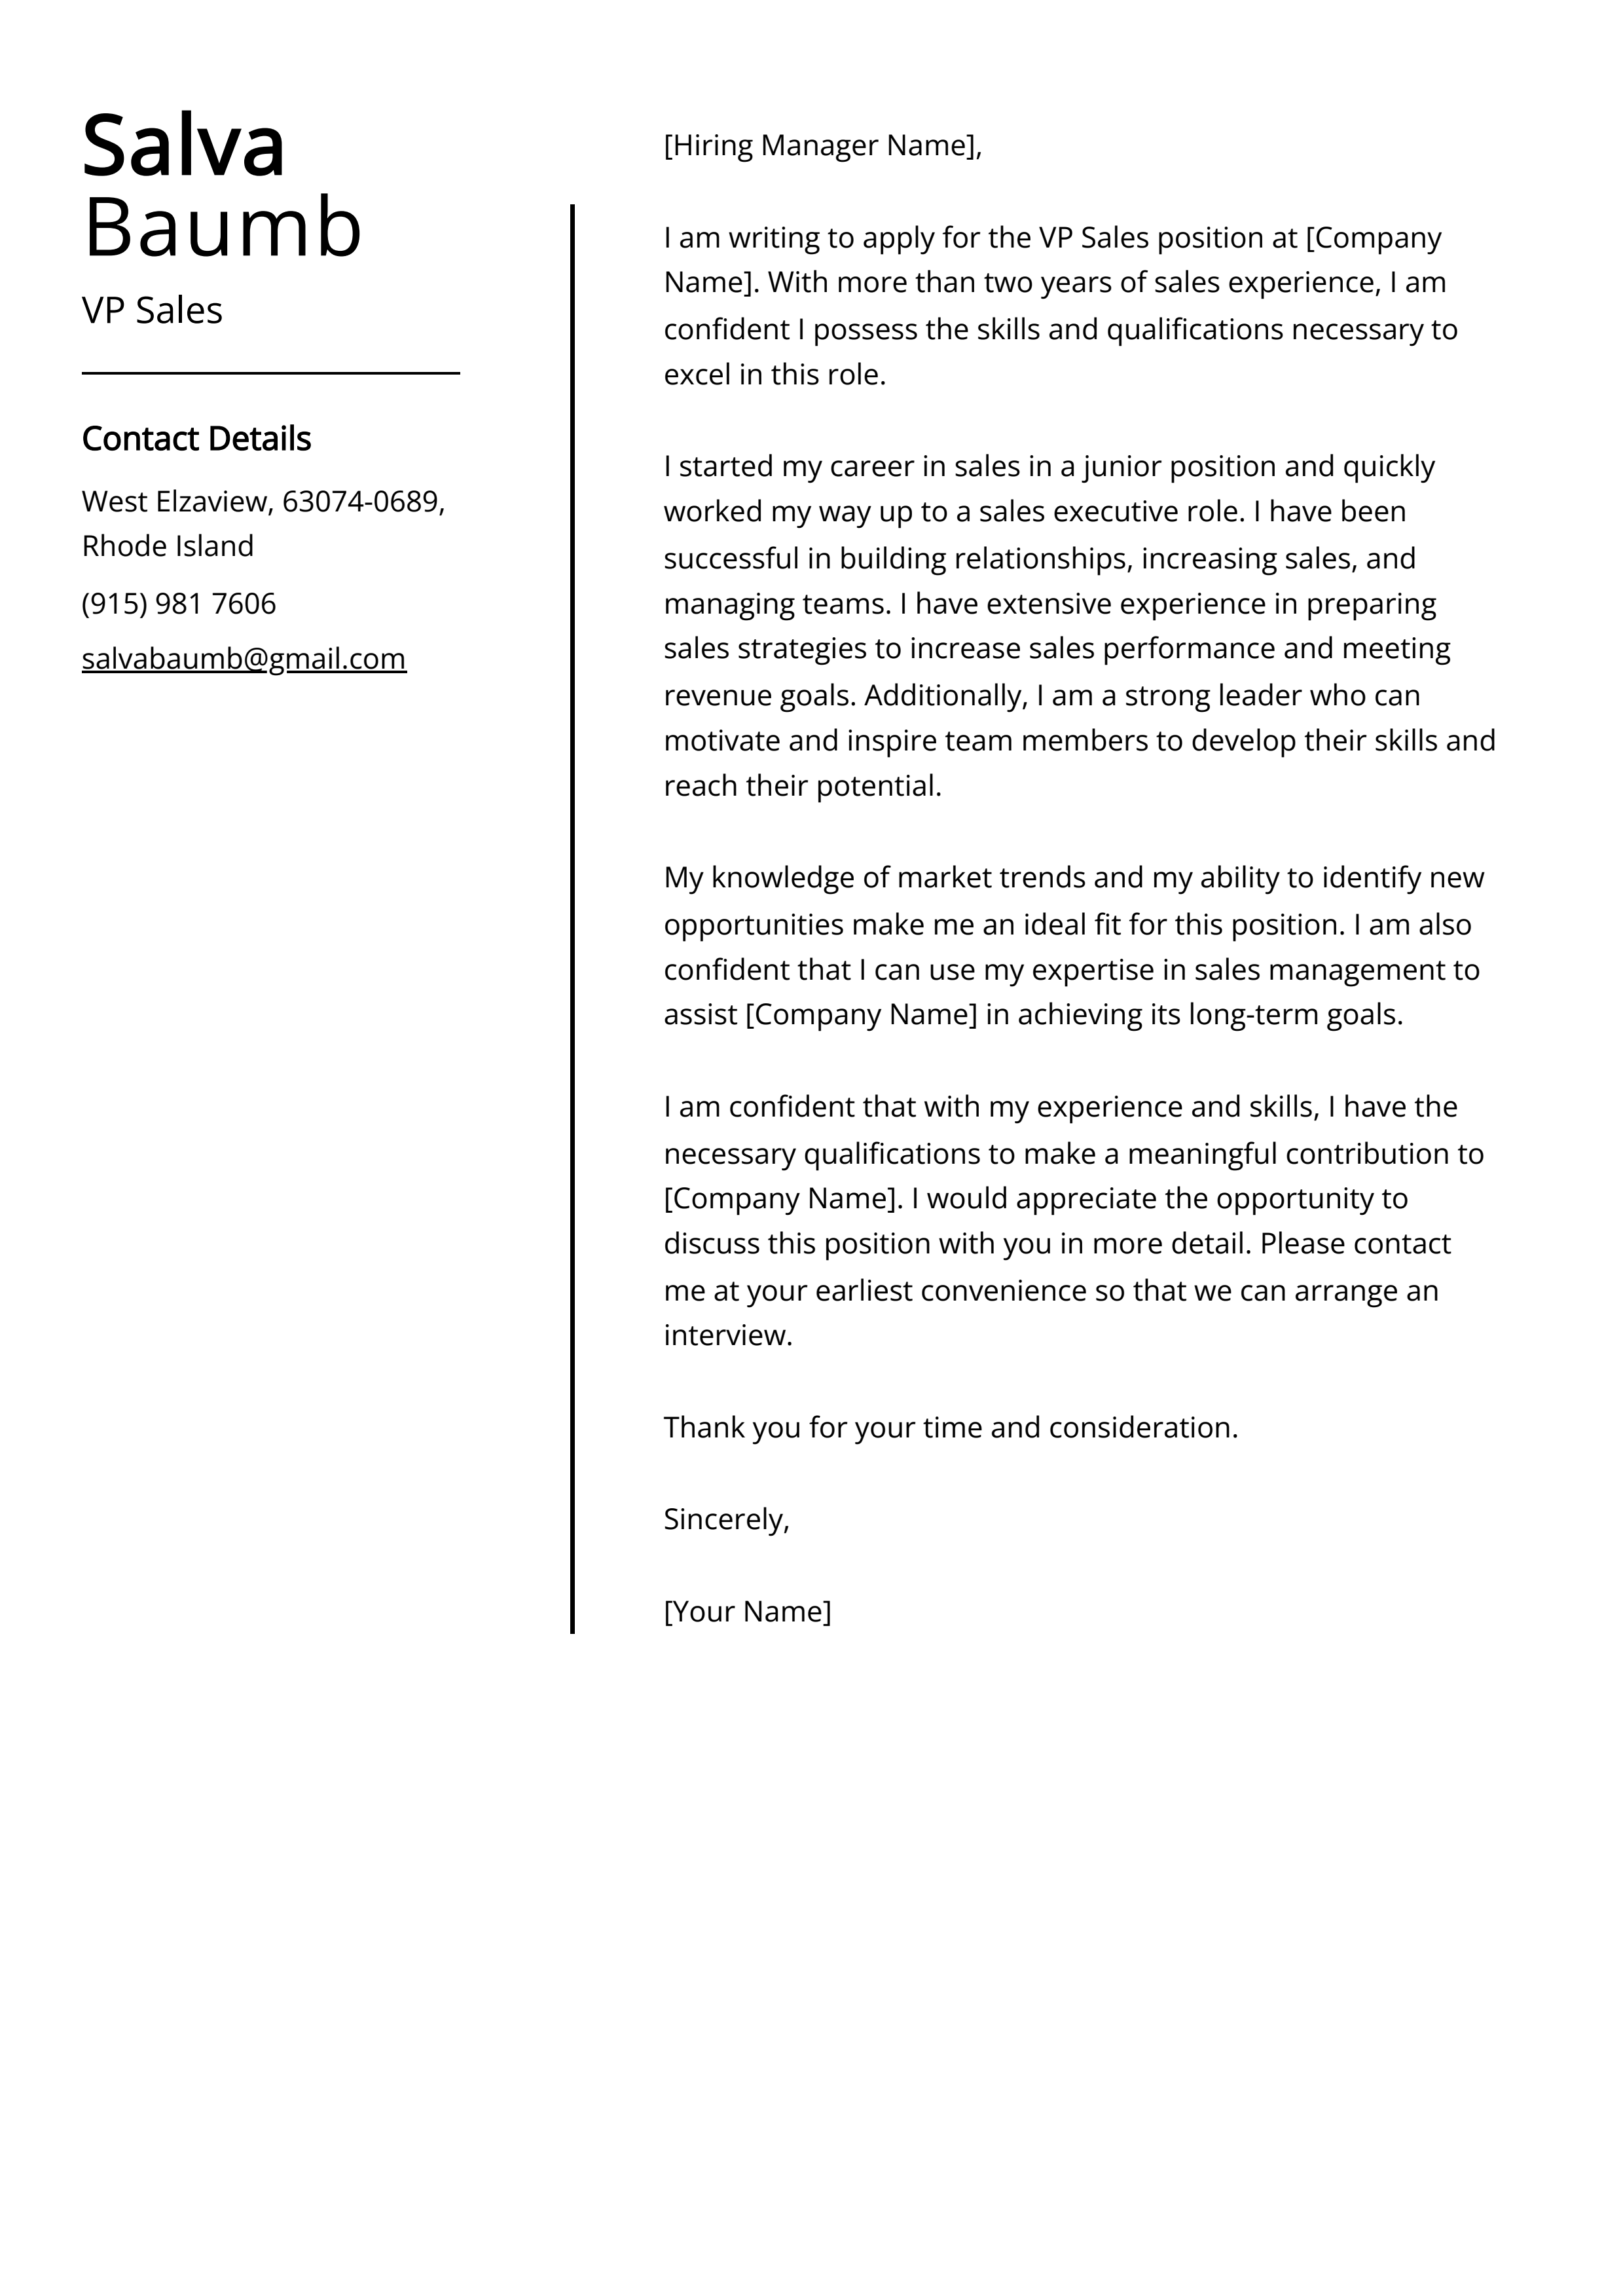 VP Sales Cover Letter Example